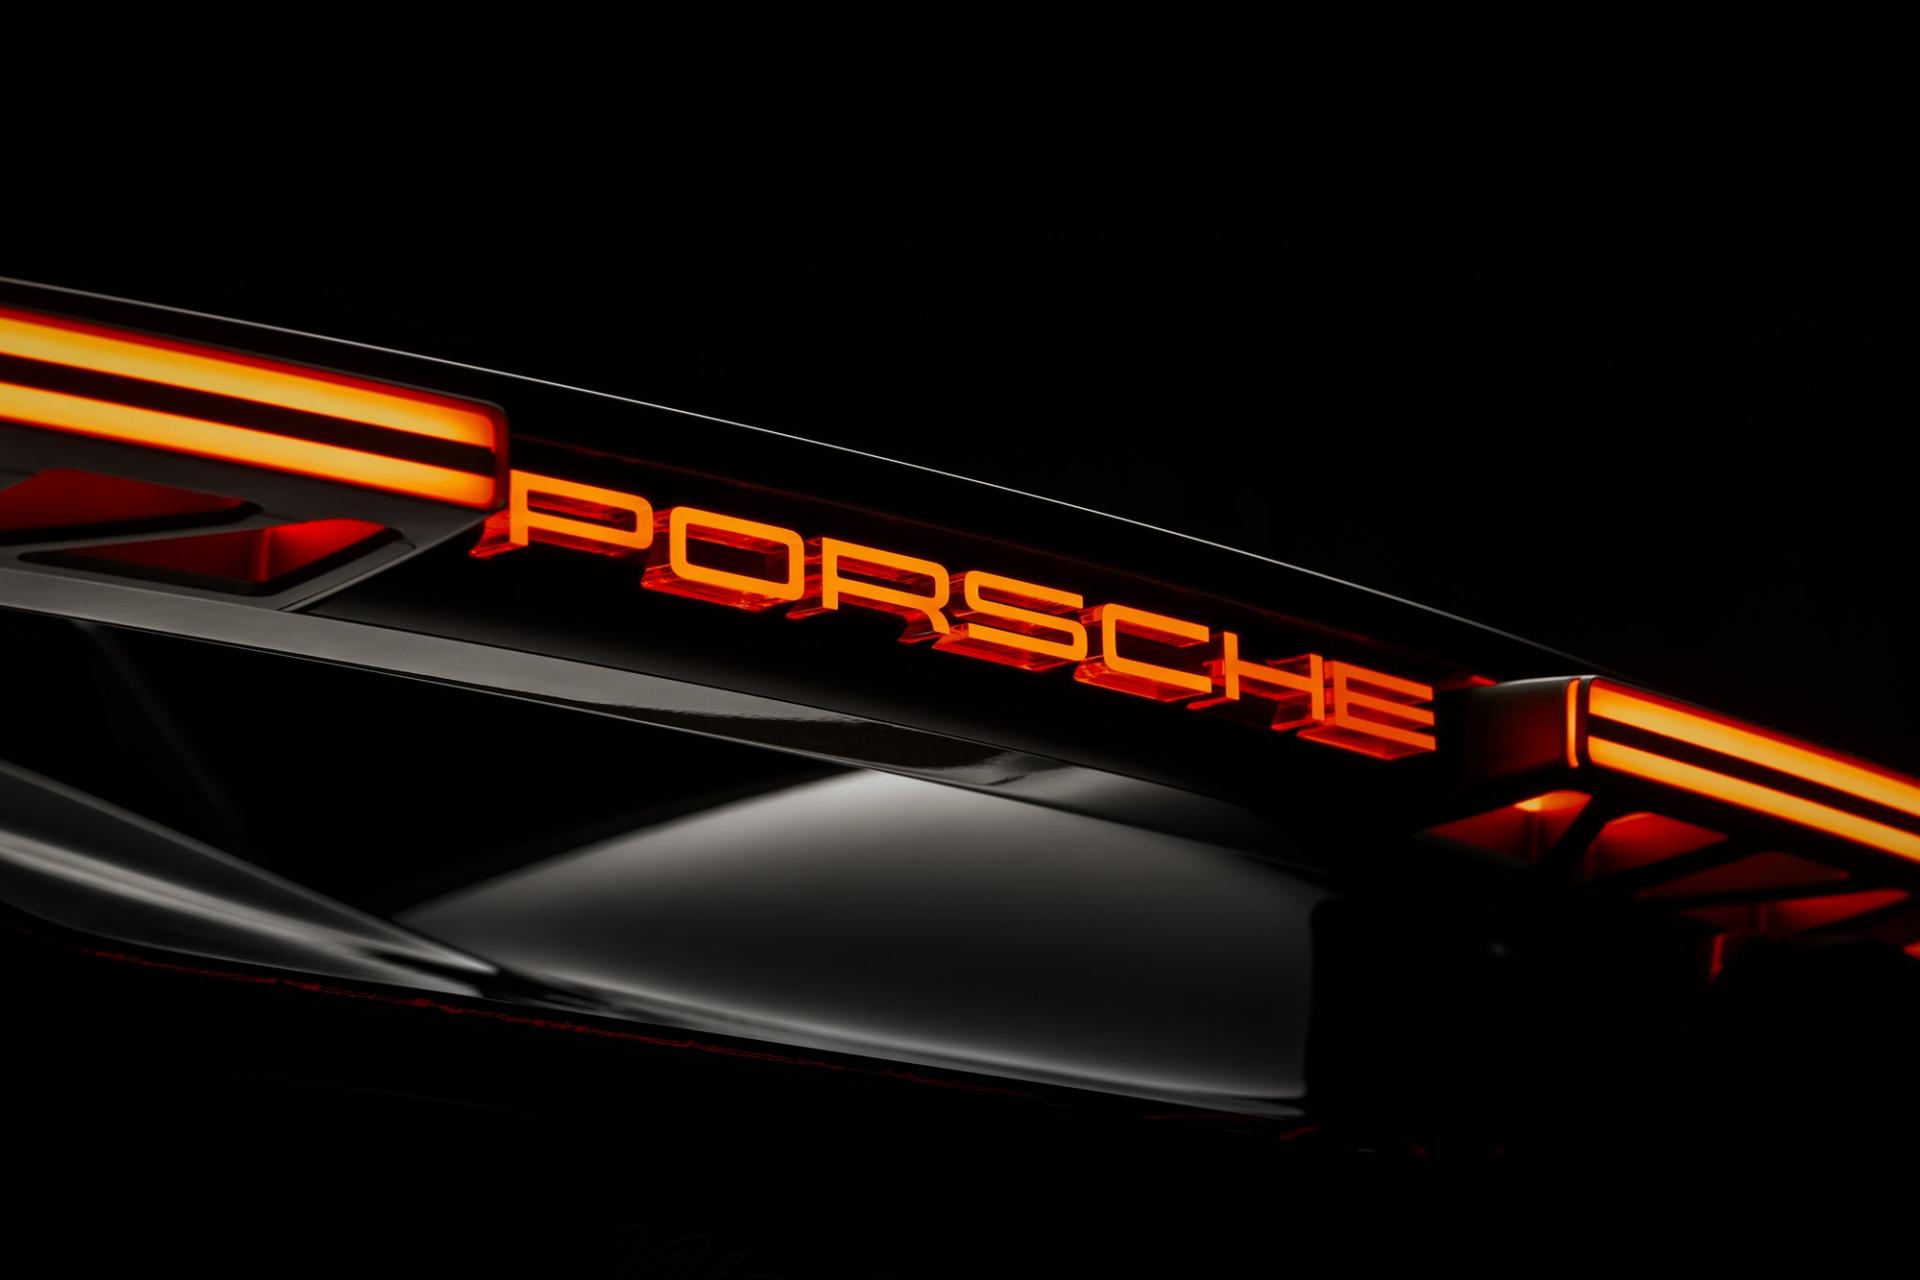 New Porsche EVs will be 'an evolution' of the sports car brand.